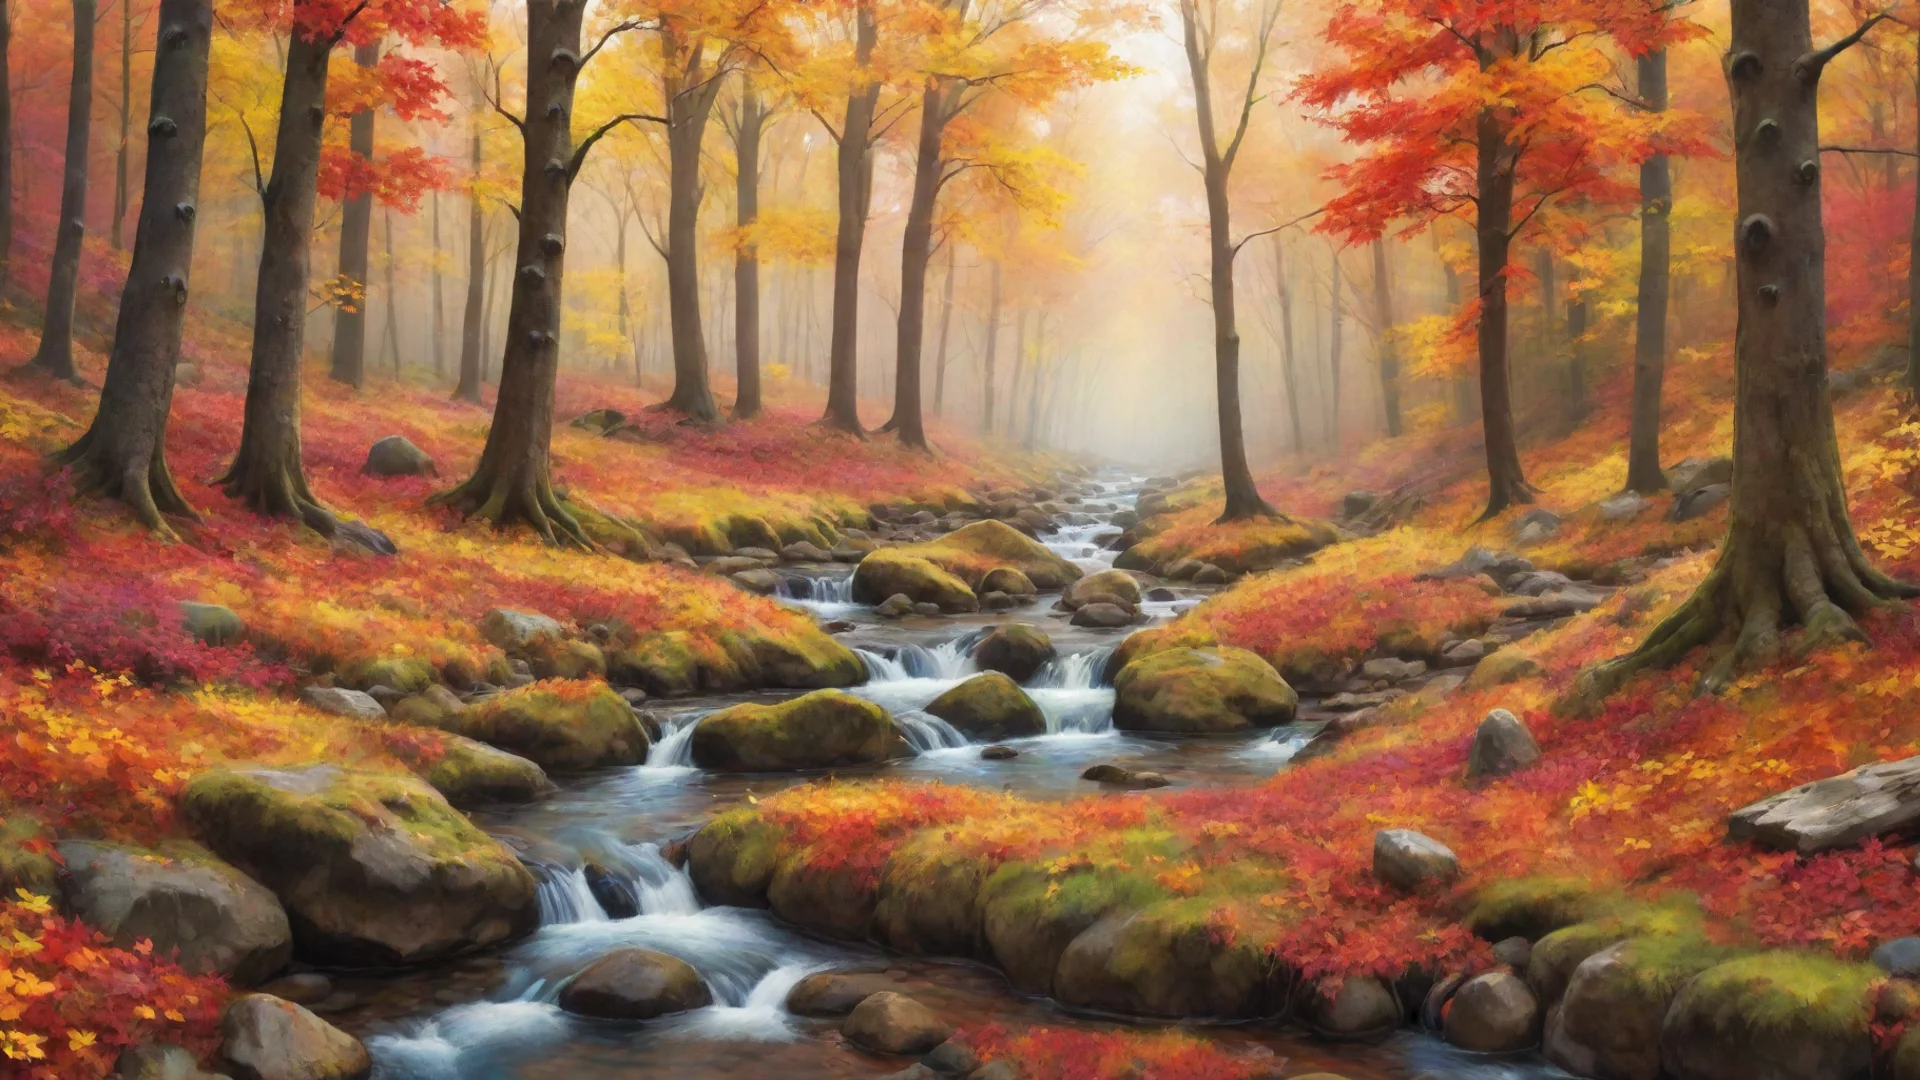 aiamazing vibrantly colorful cozy autumn forest with a stream art wallpaper awesome portrait 2 wide